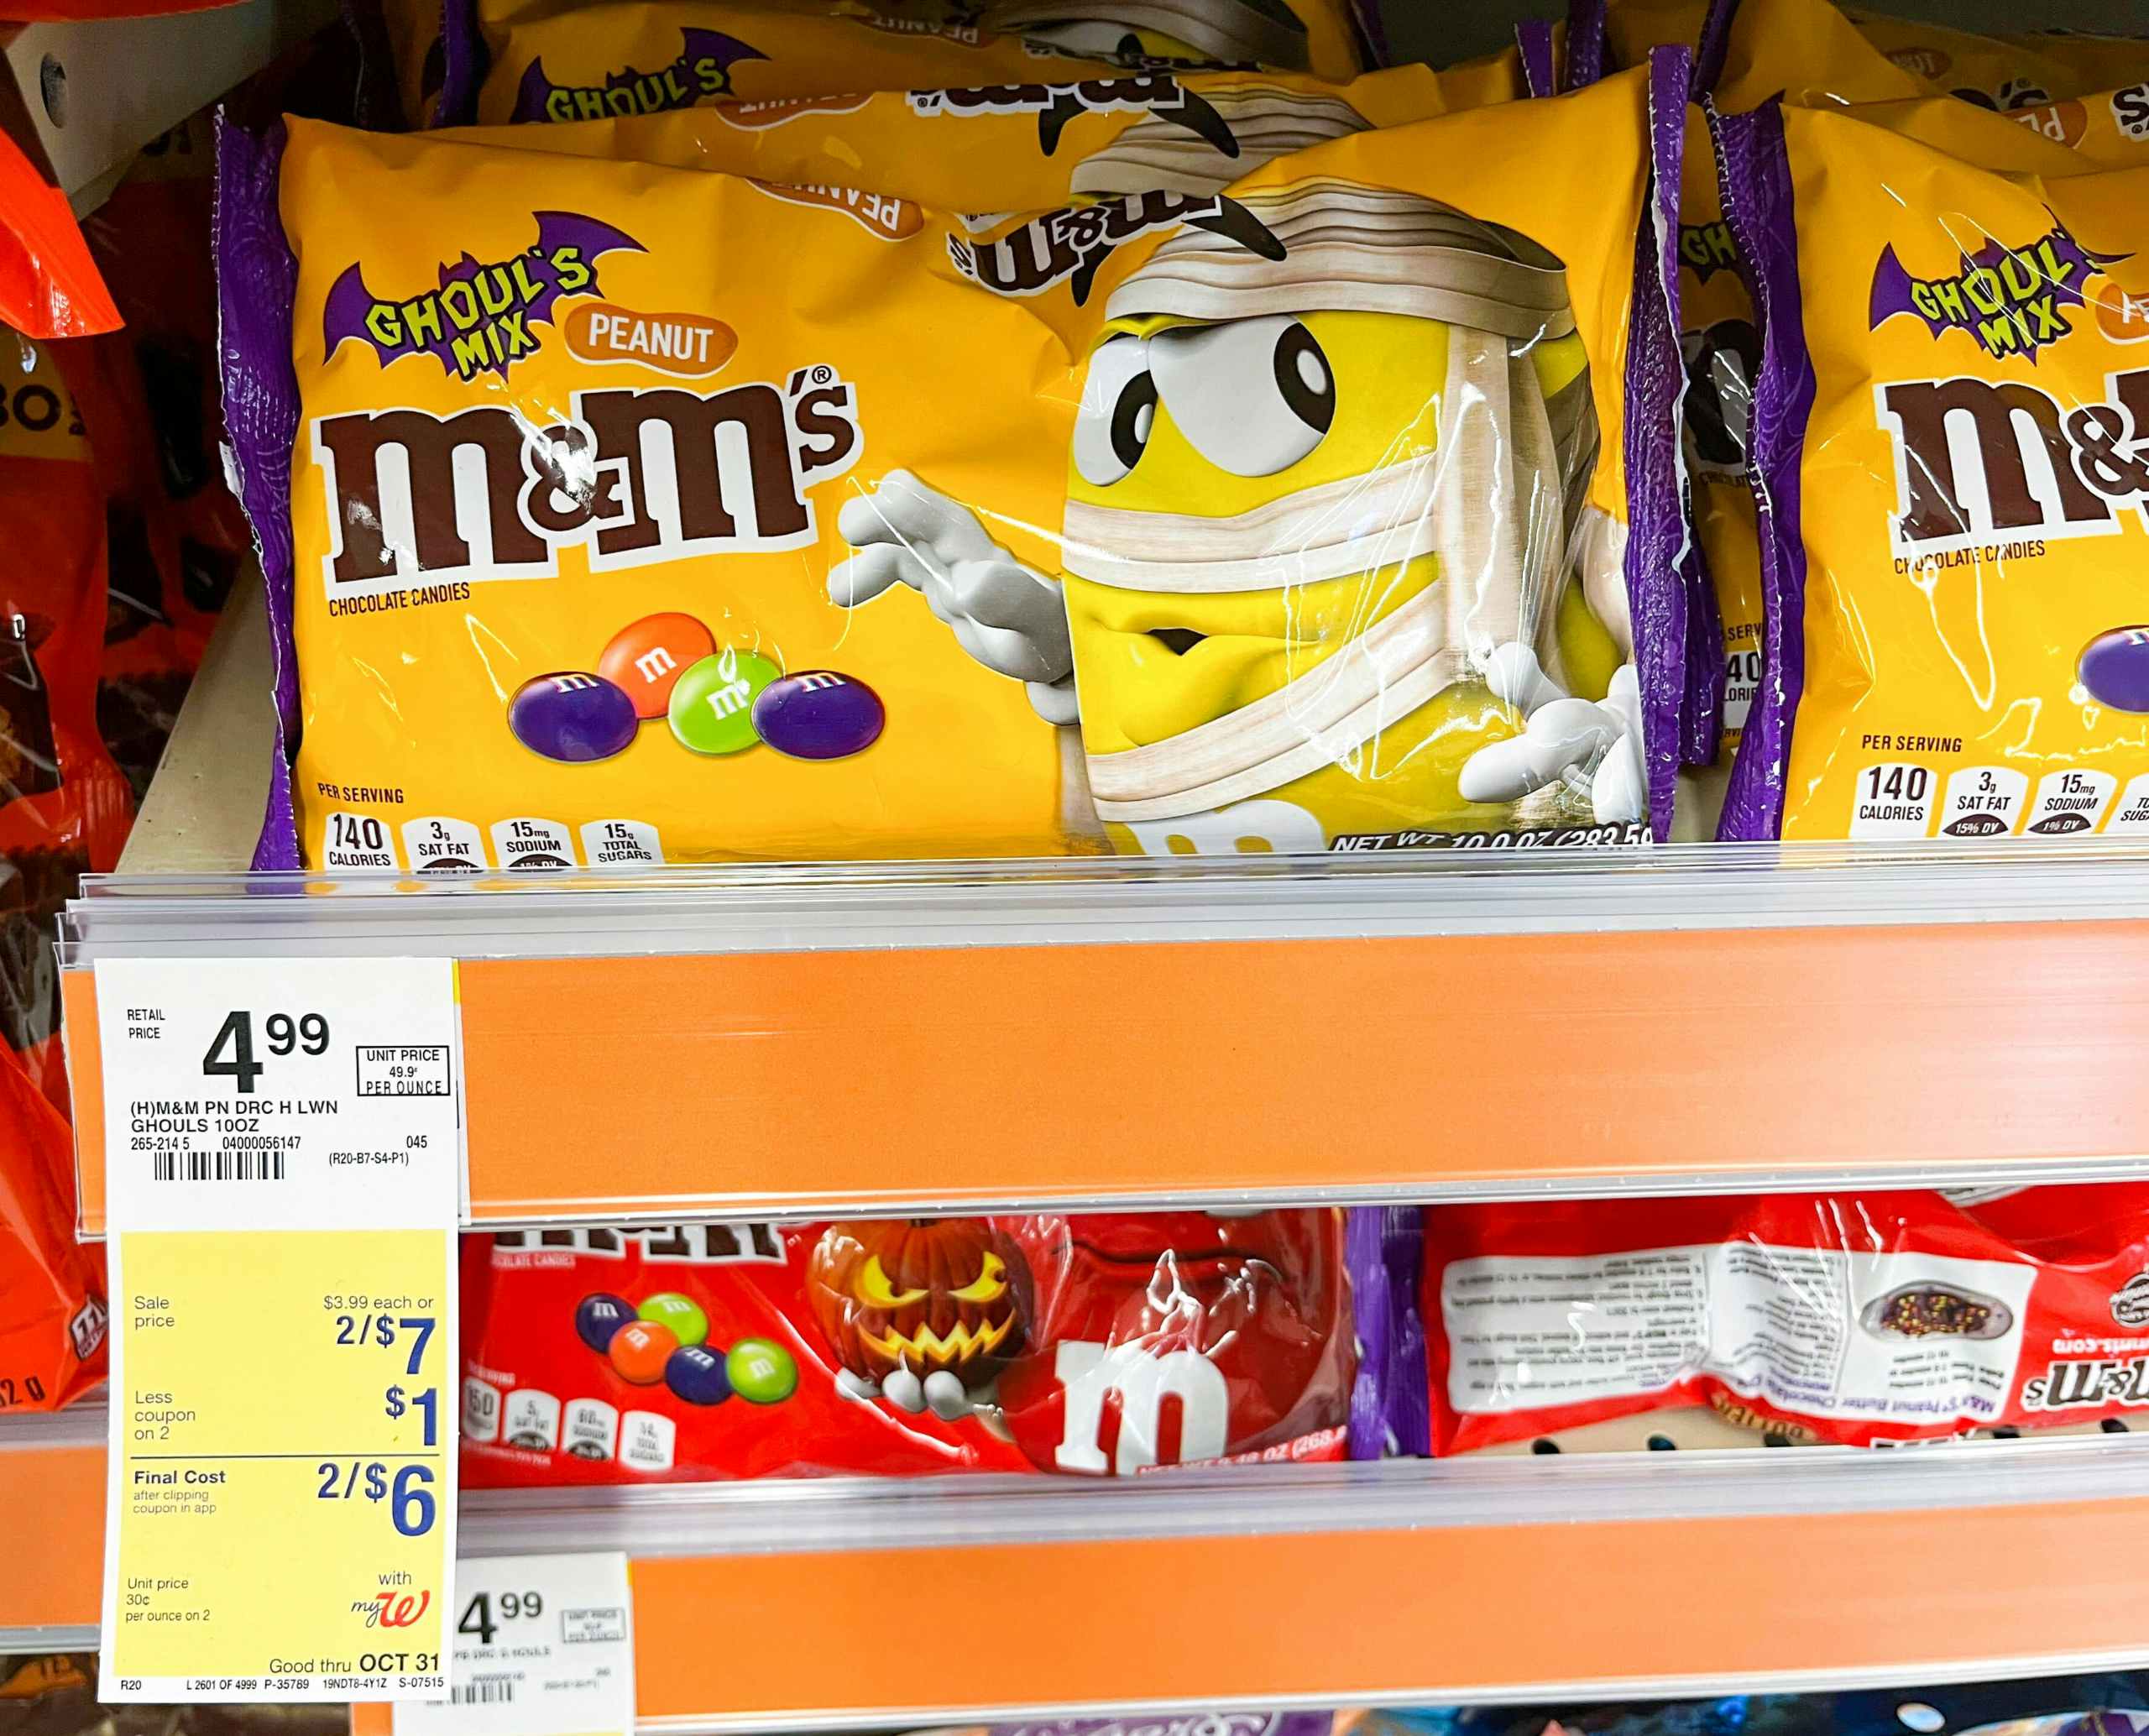 bag of M&M's Ghoul's Mix candy on shelf with sales tag